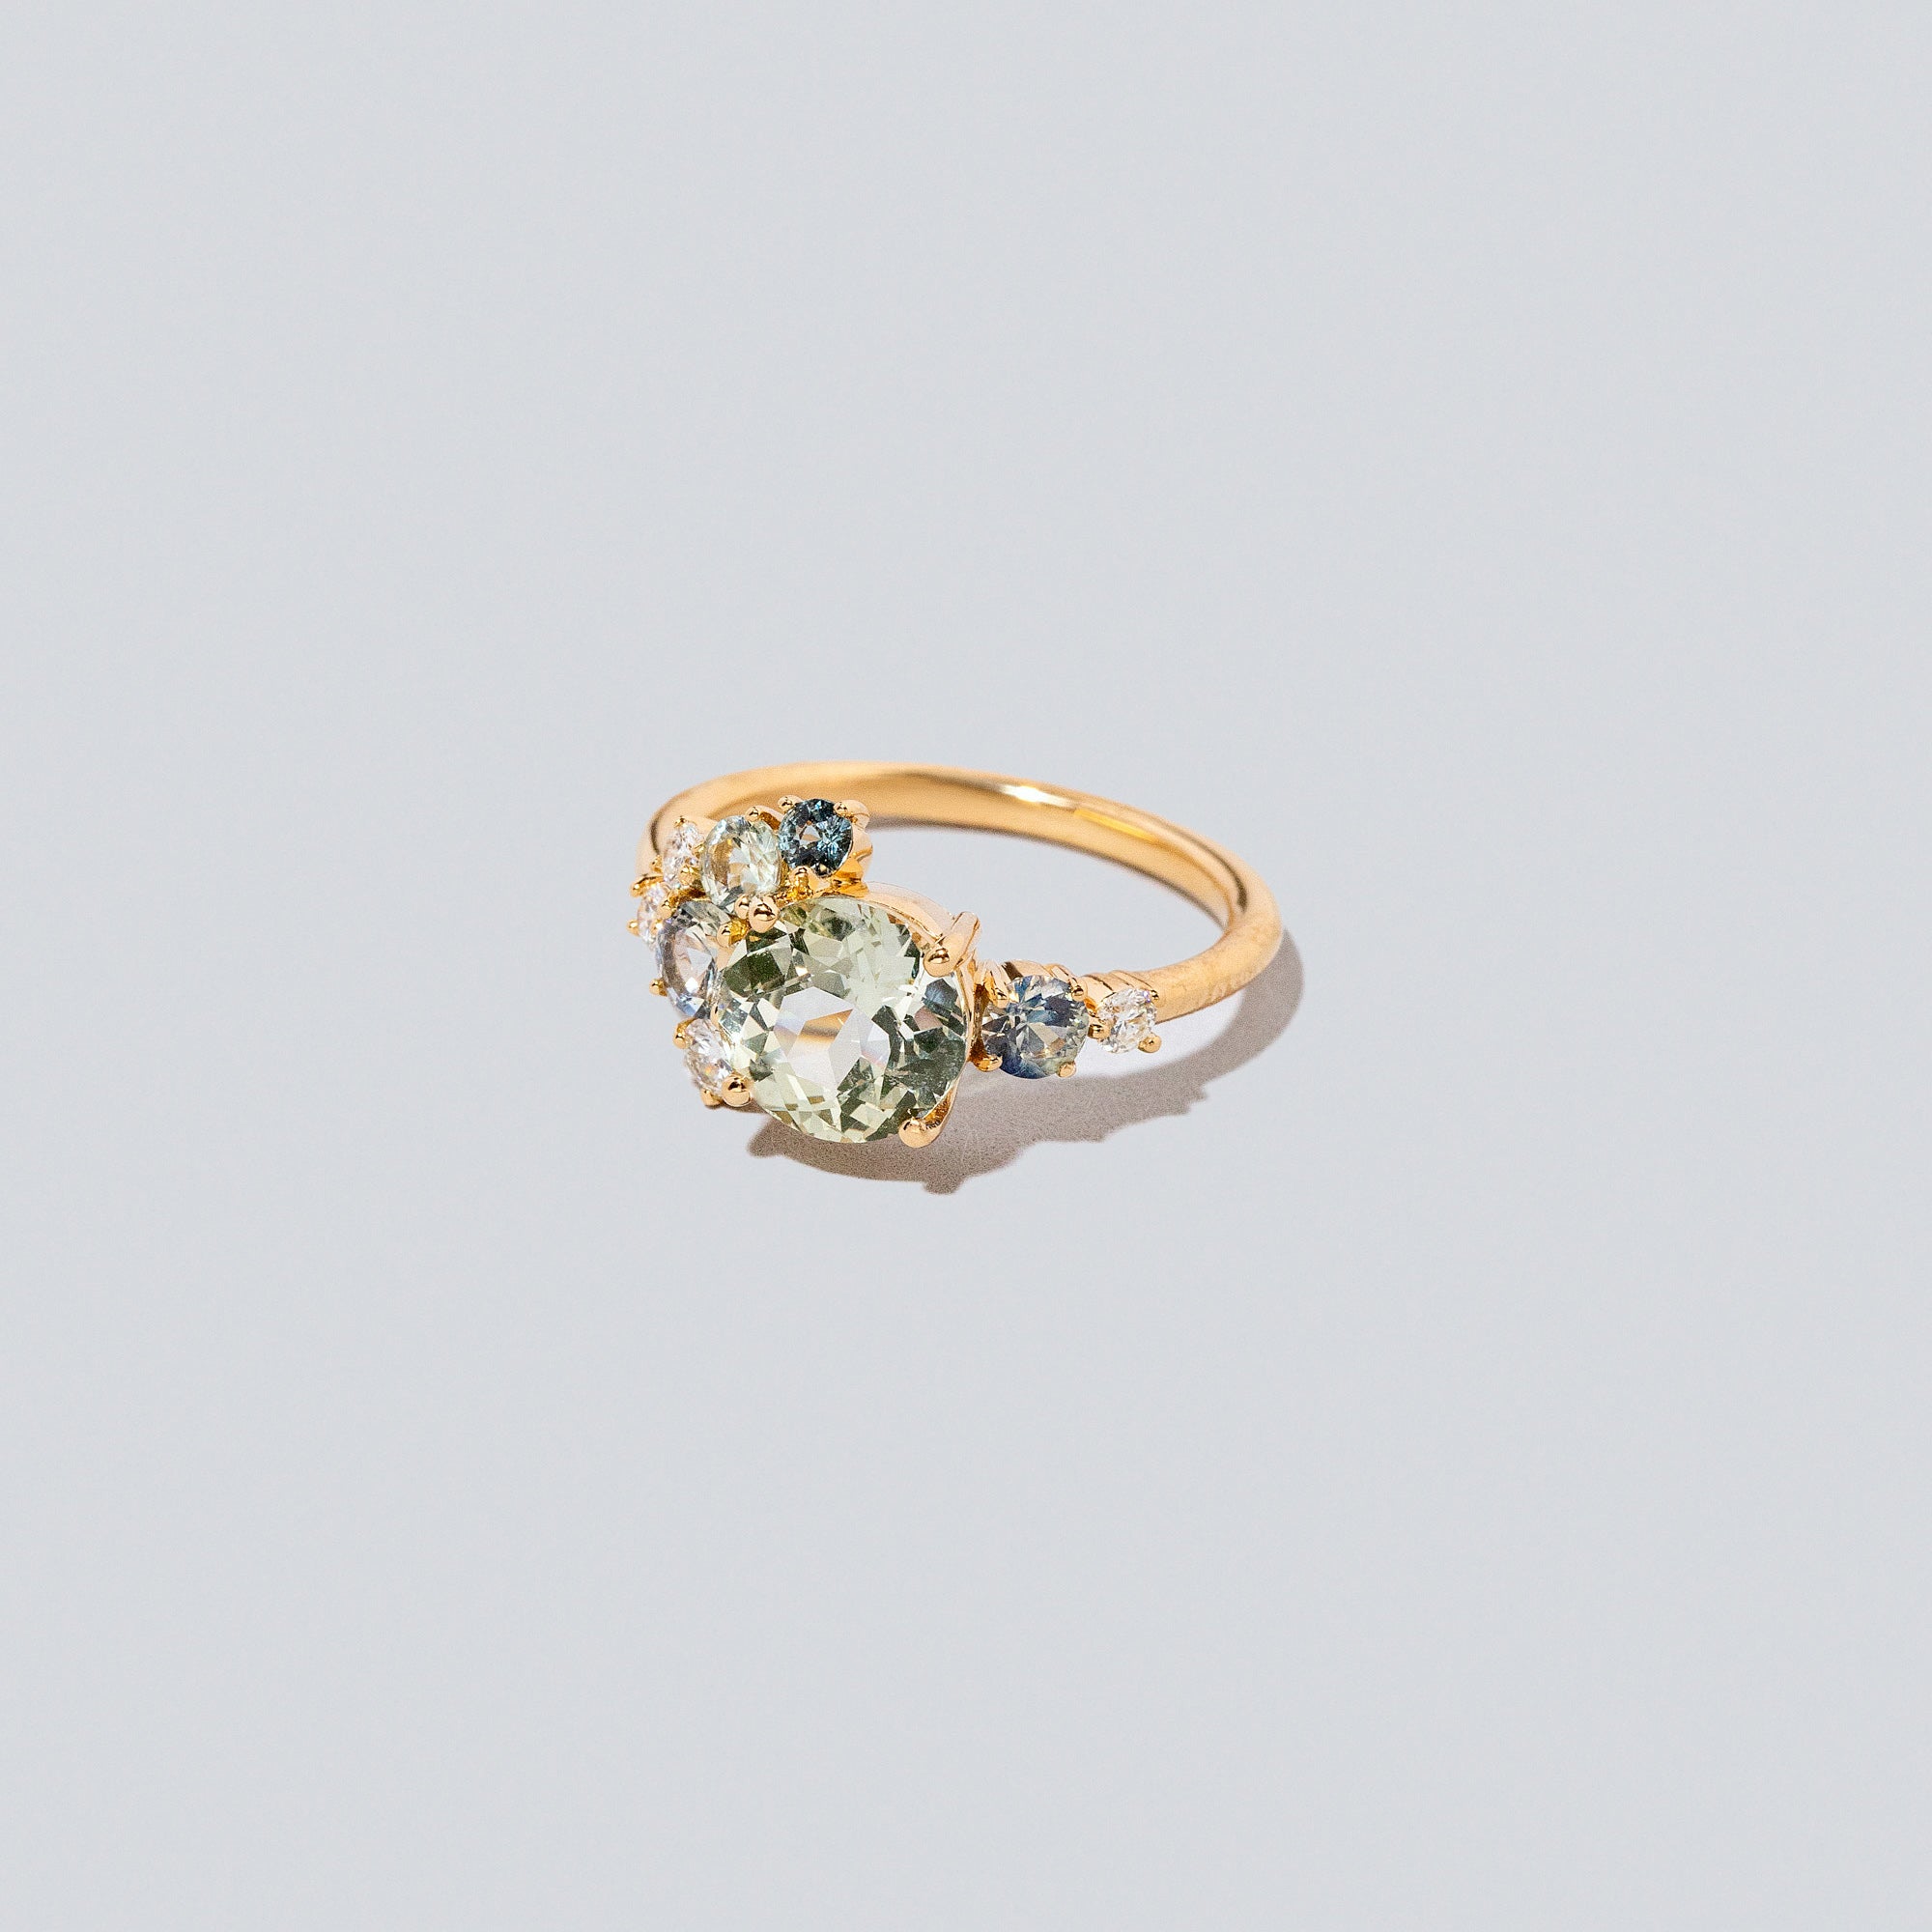 product_details::Vega Ring on light colored background.